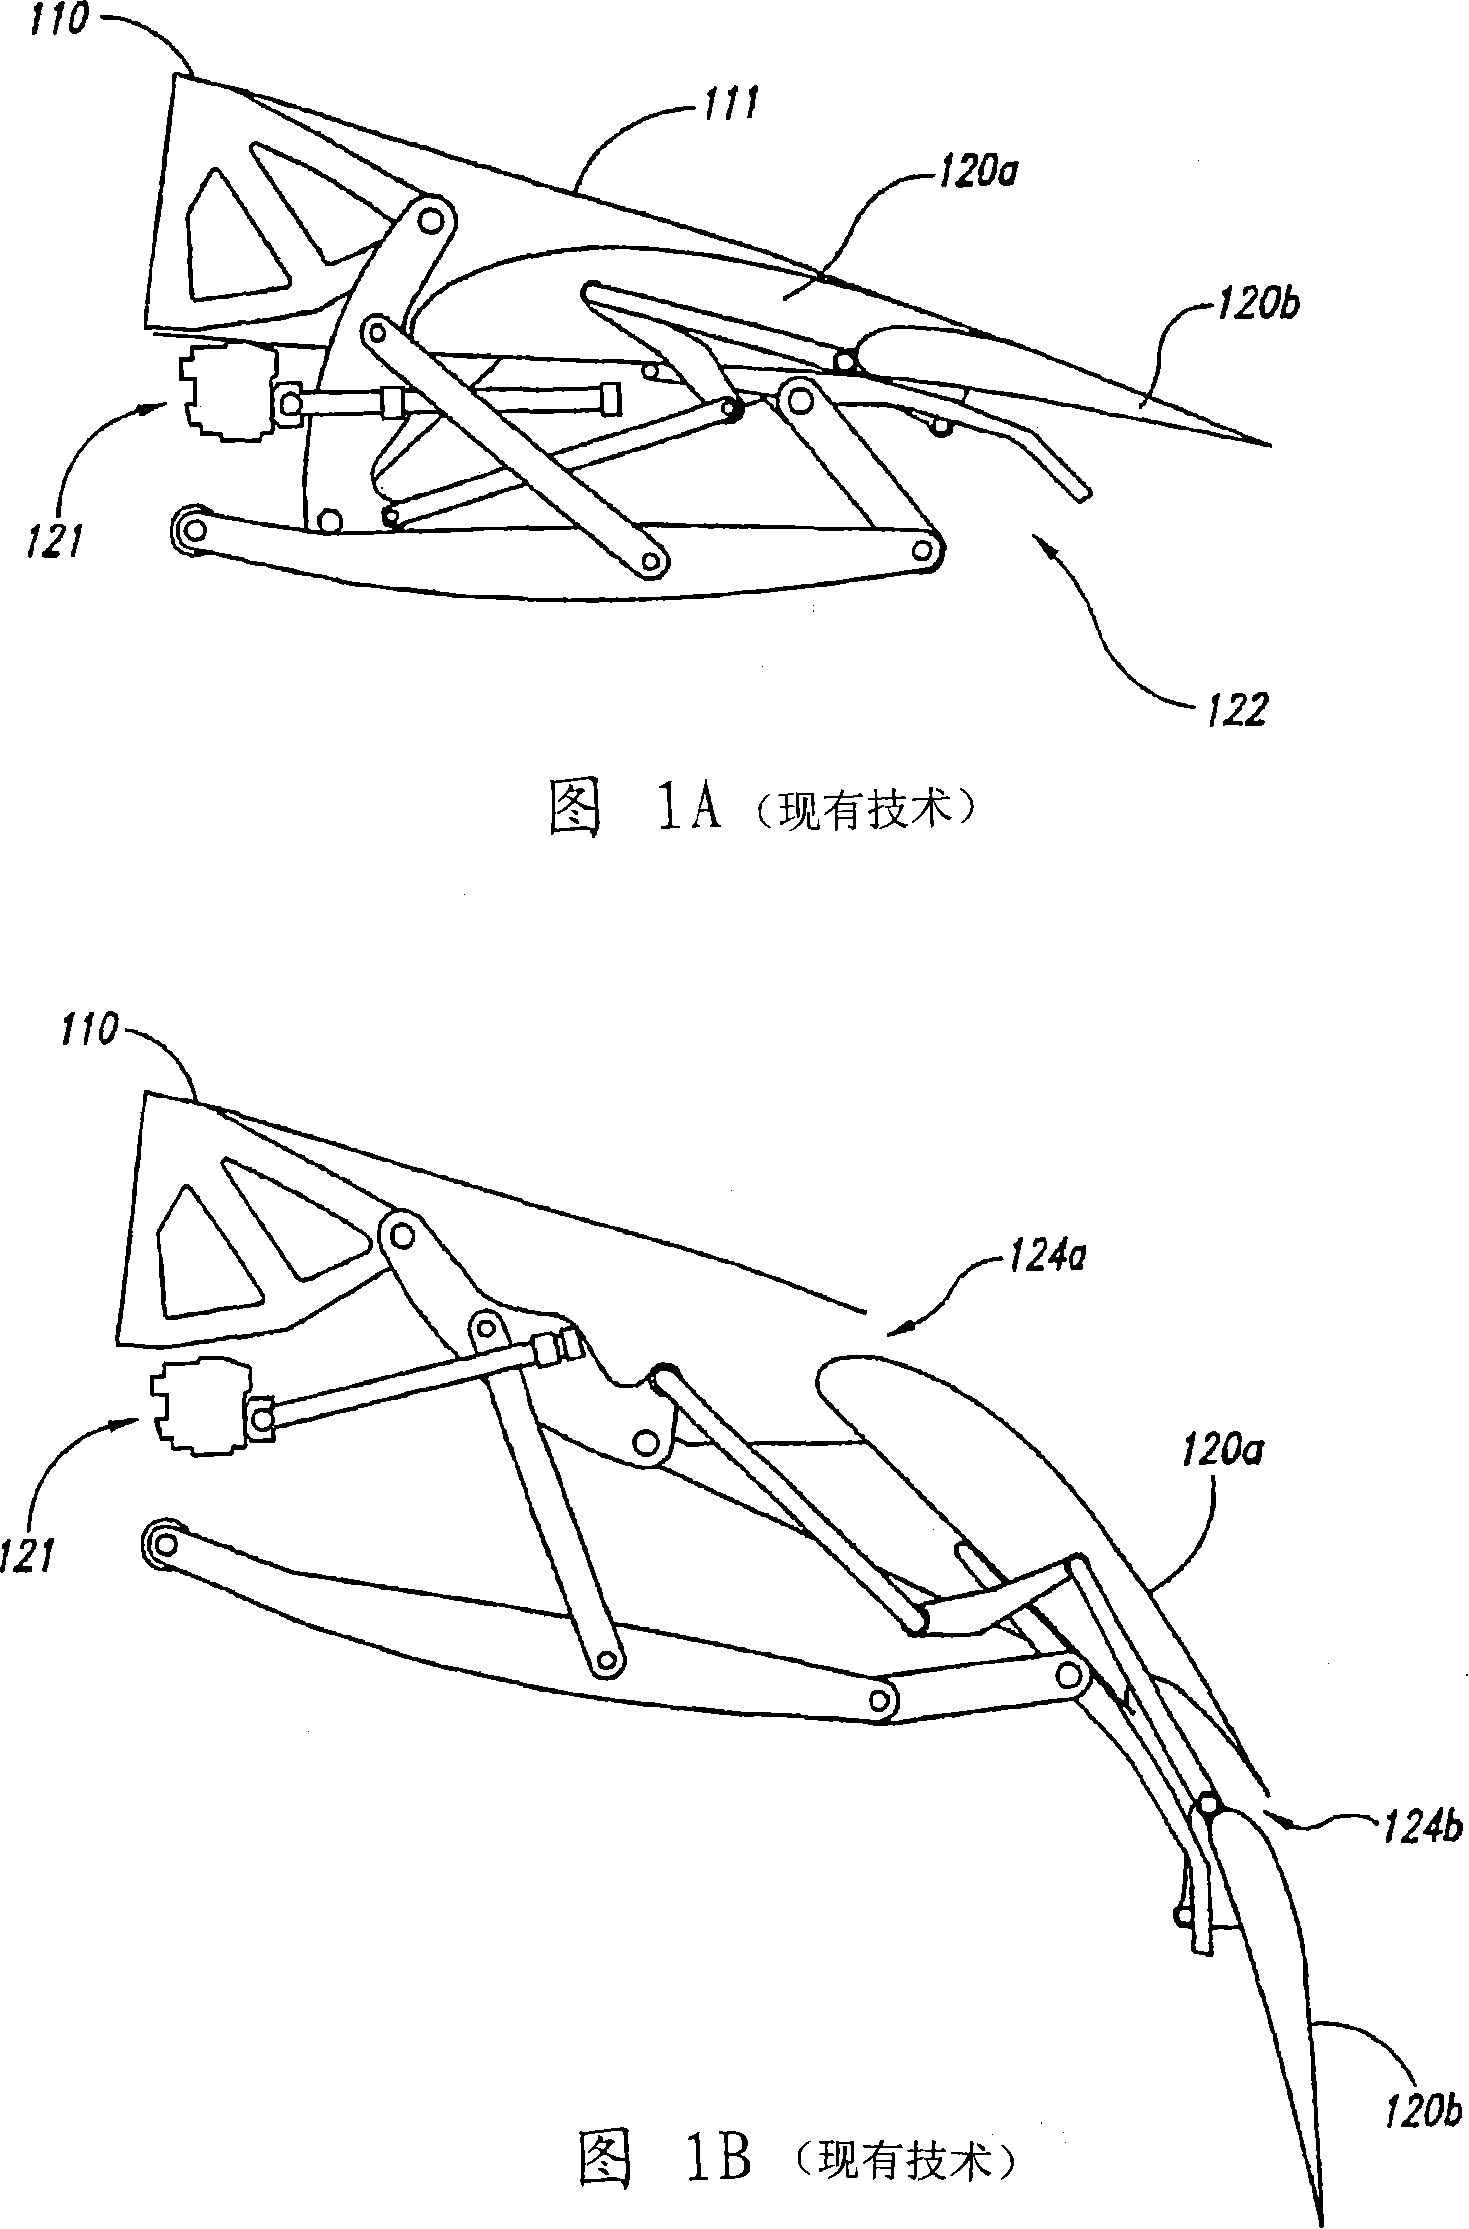 Systems and methods for controlling aircraft flaps and spoilers